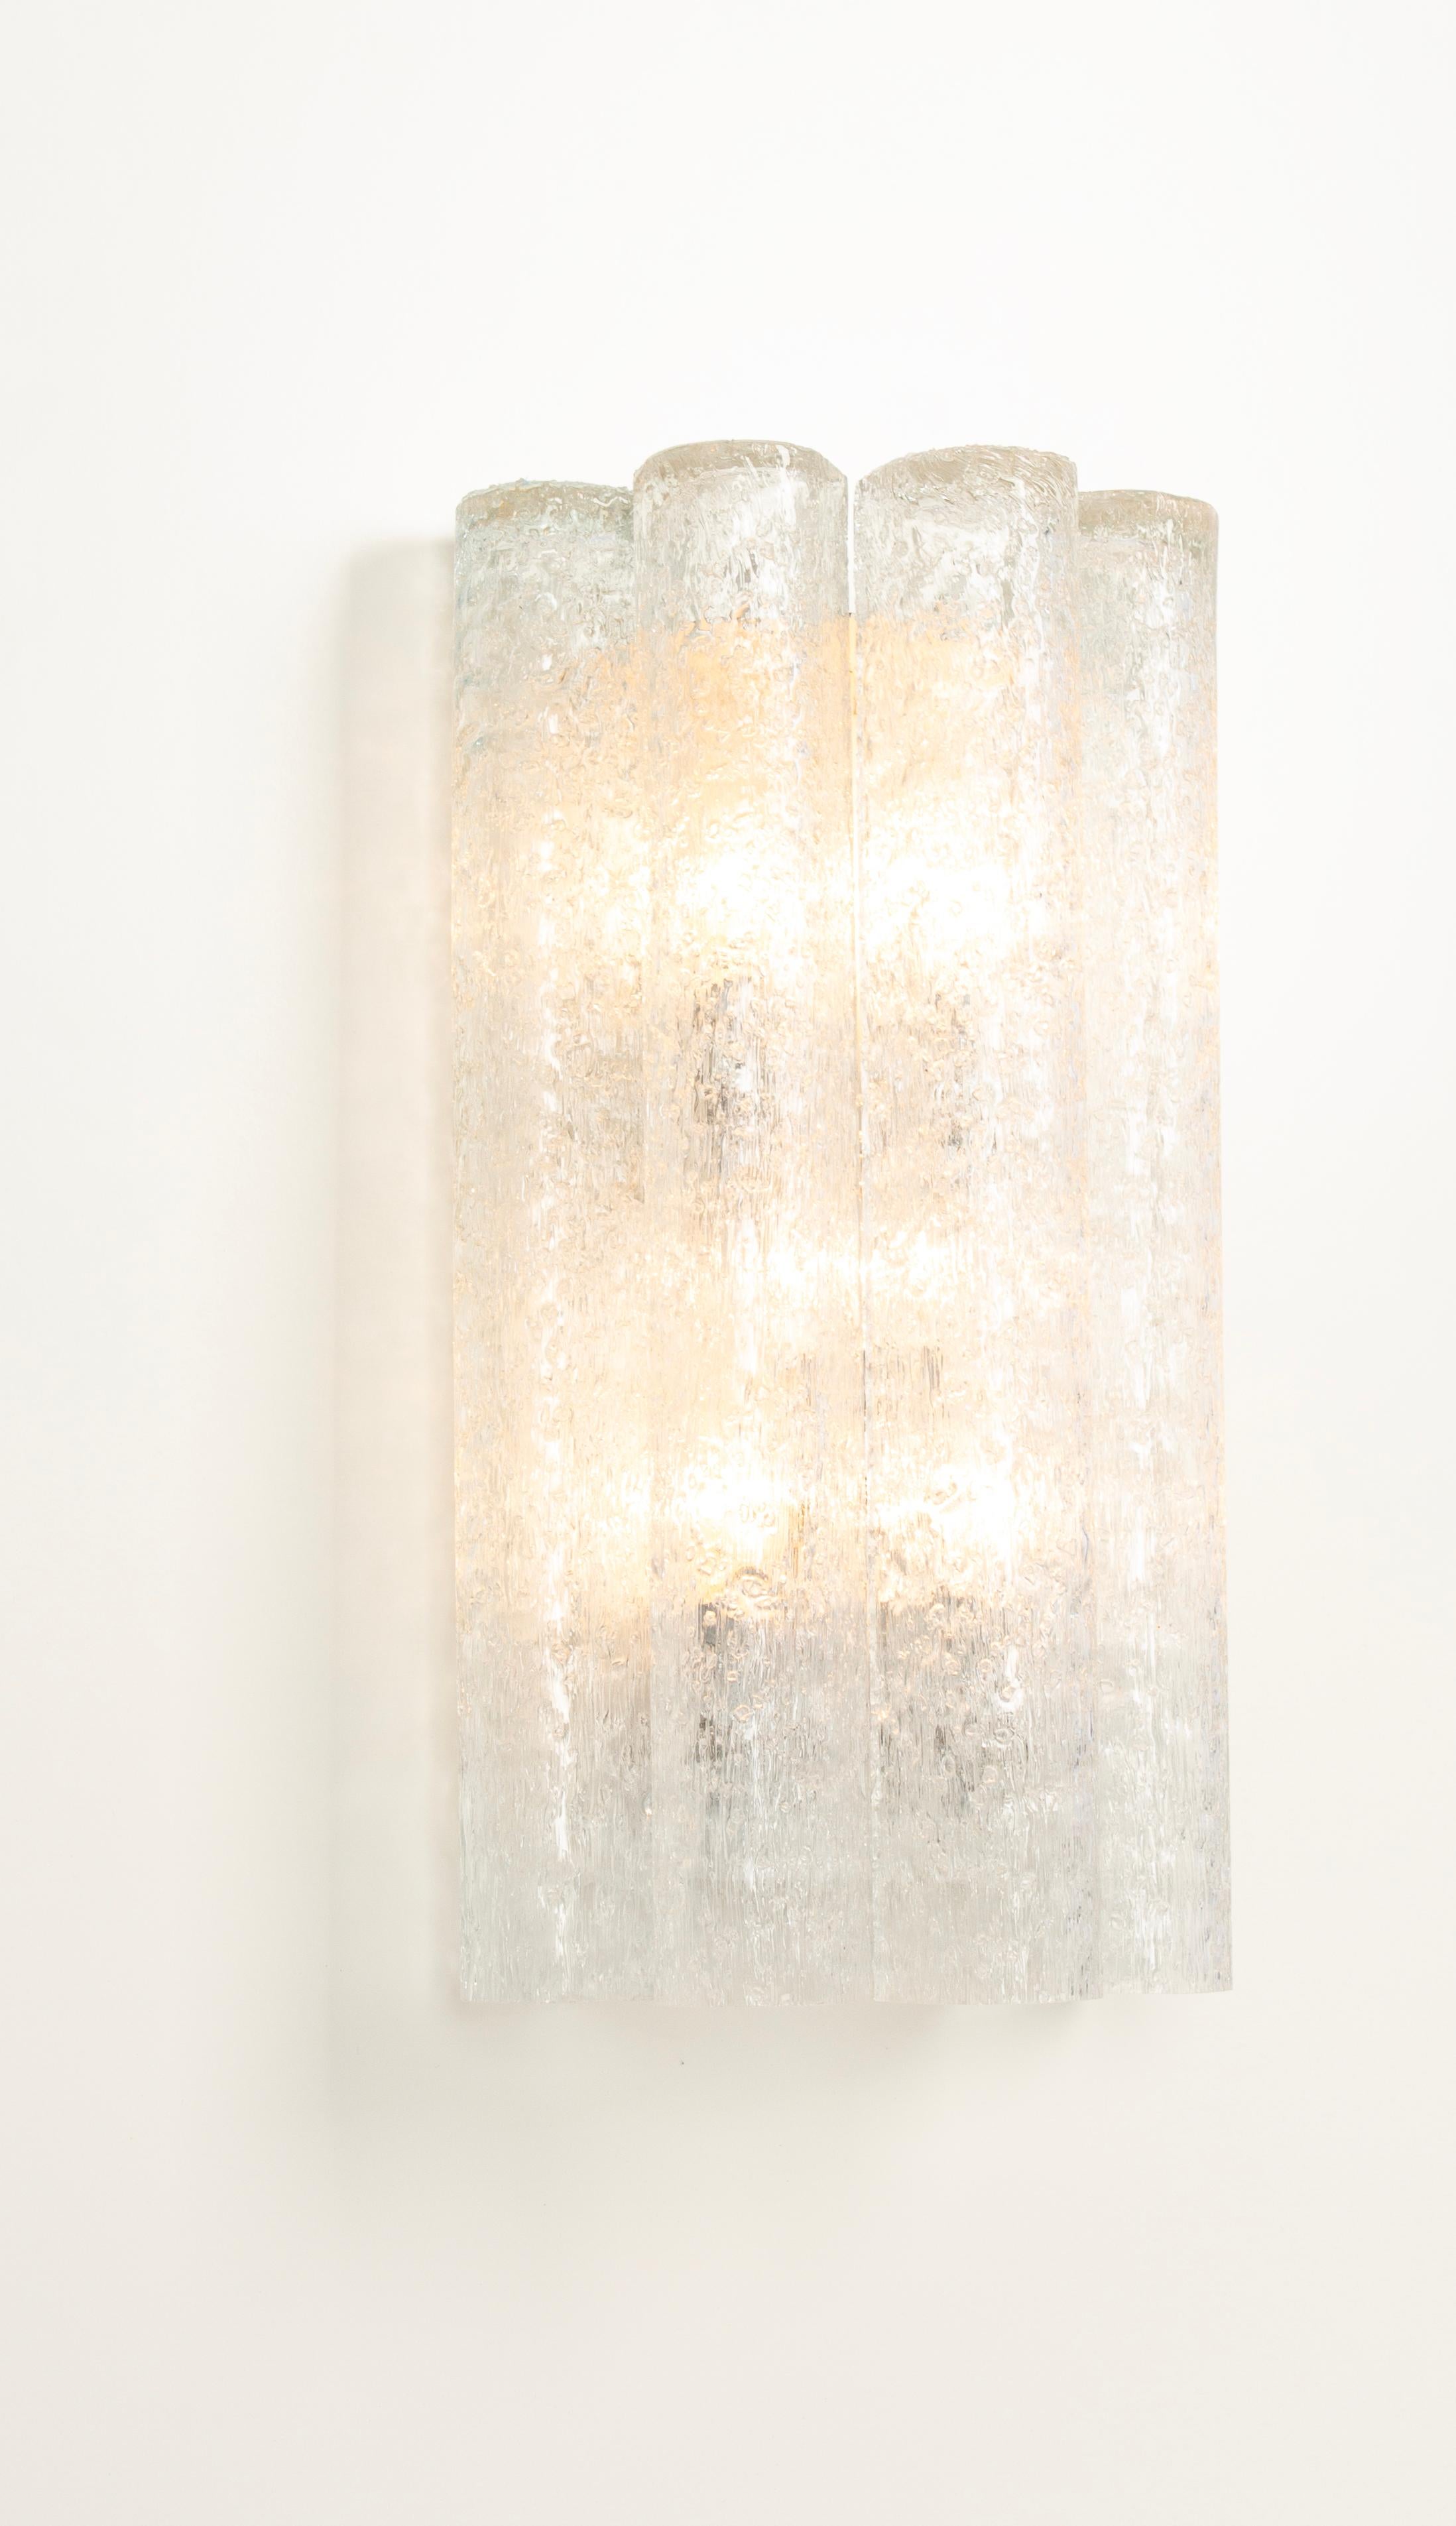 1 of 8 Sets /Large Pair of murano Glass Wall Sconces by Doria, Germany, 1960s For Sale 2